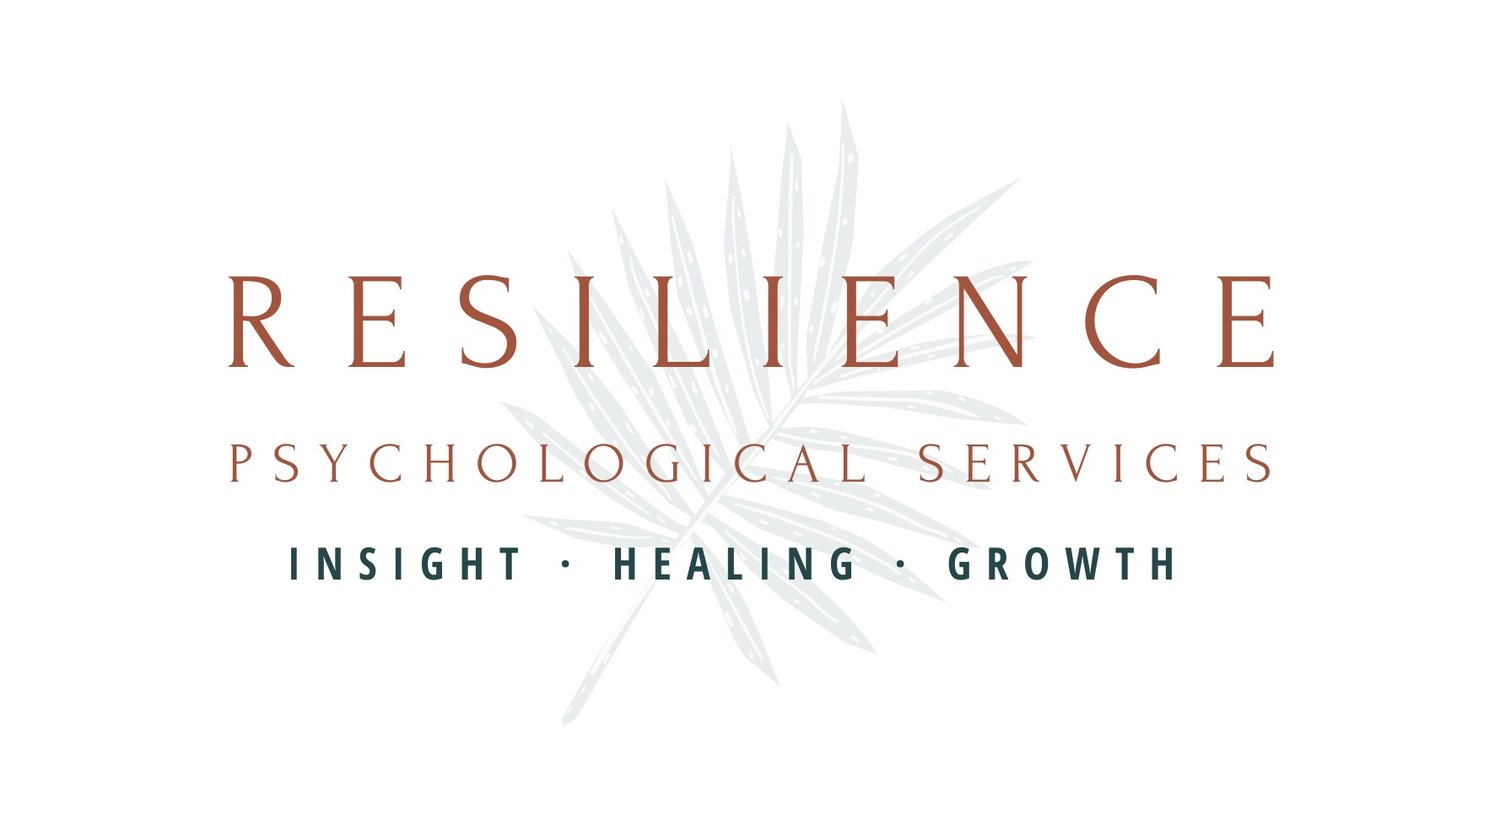 Victoria Buttery, PhD - Resilience Psychological Services - Insight. Healing. Growth.